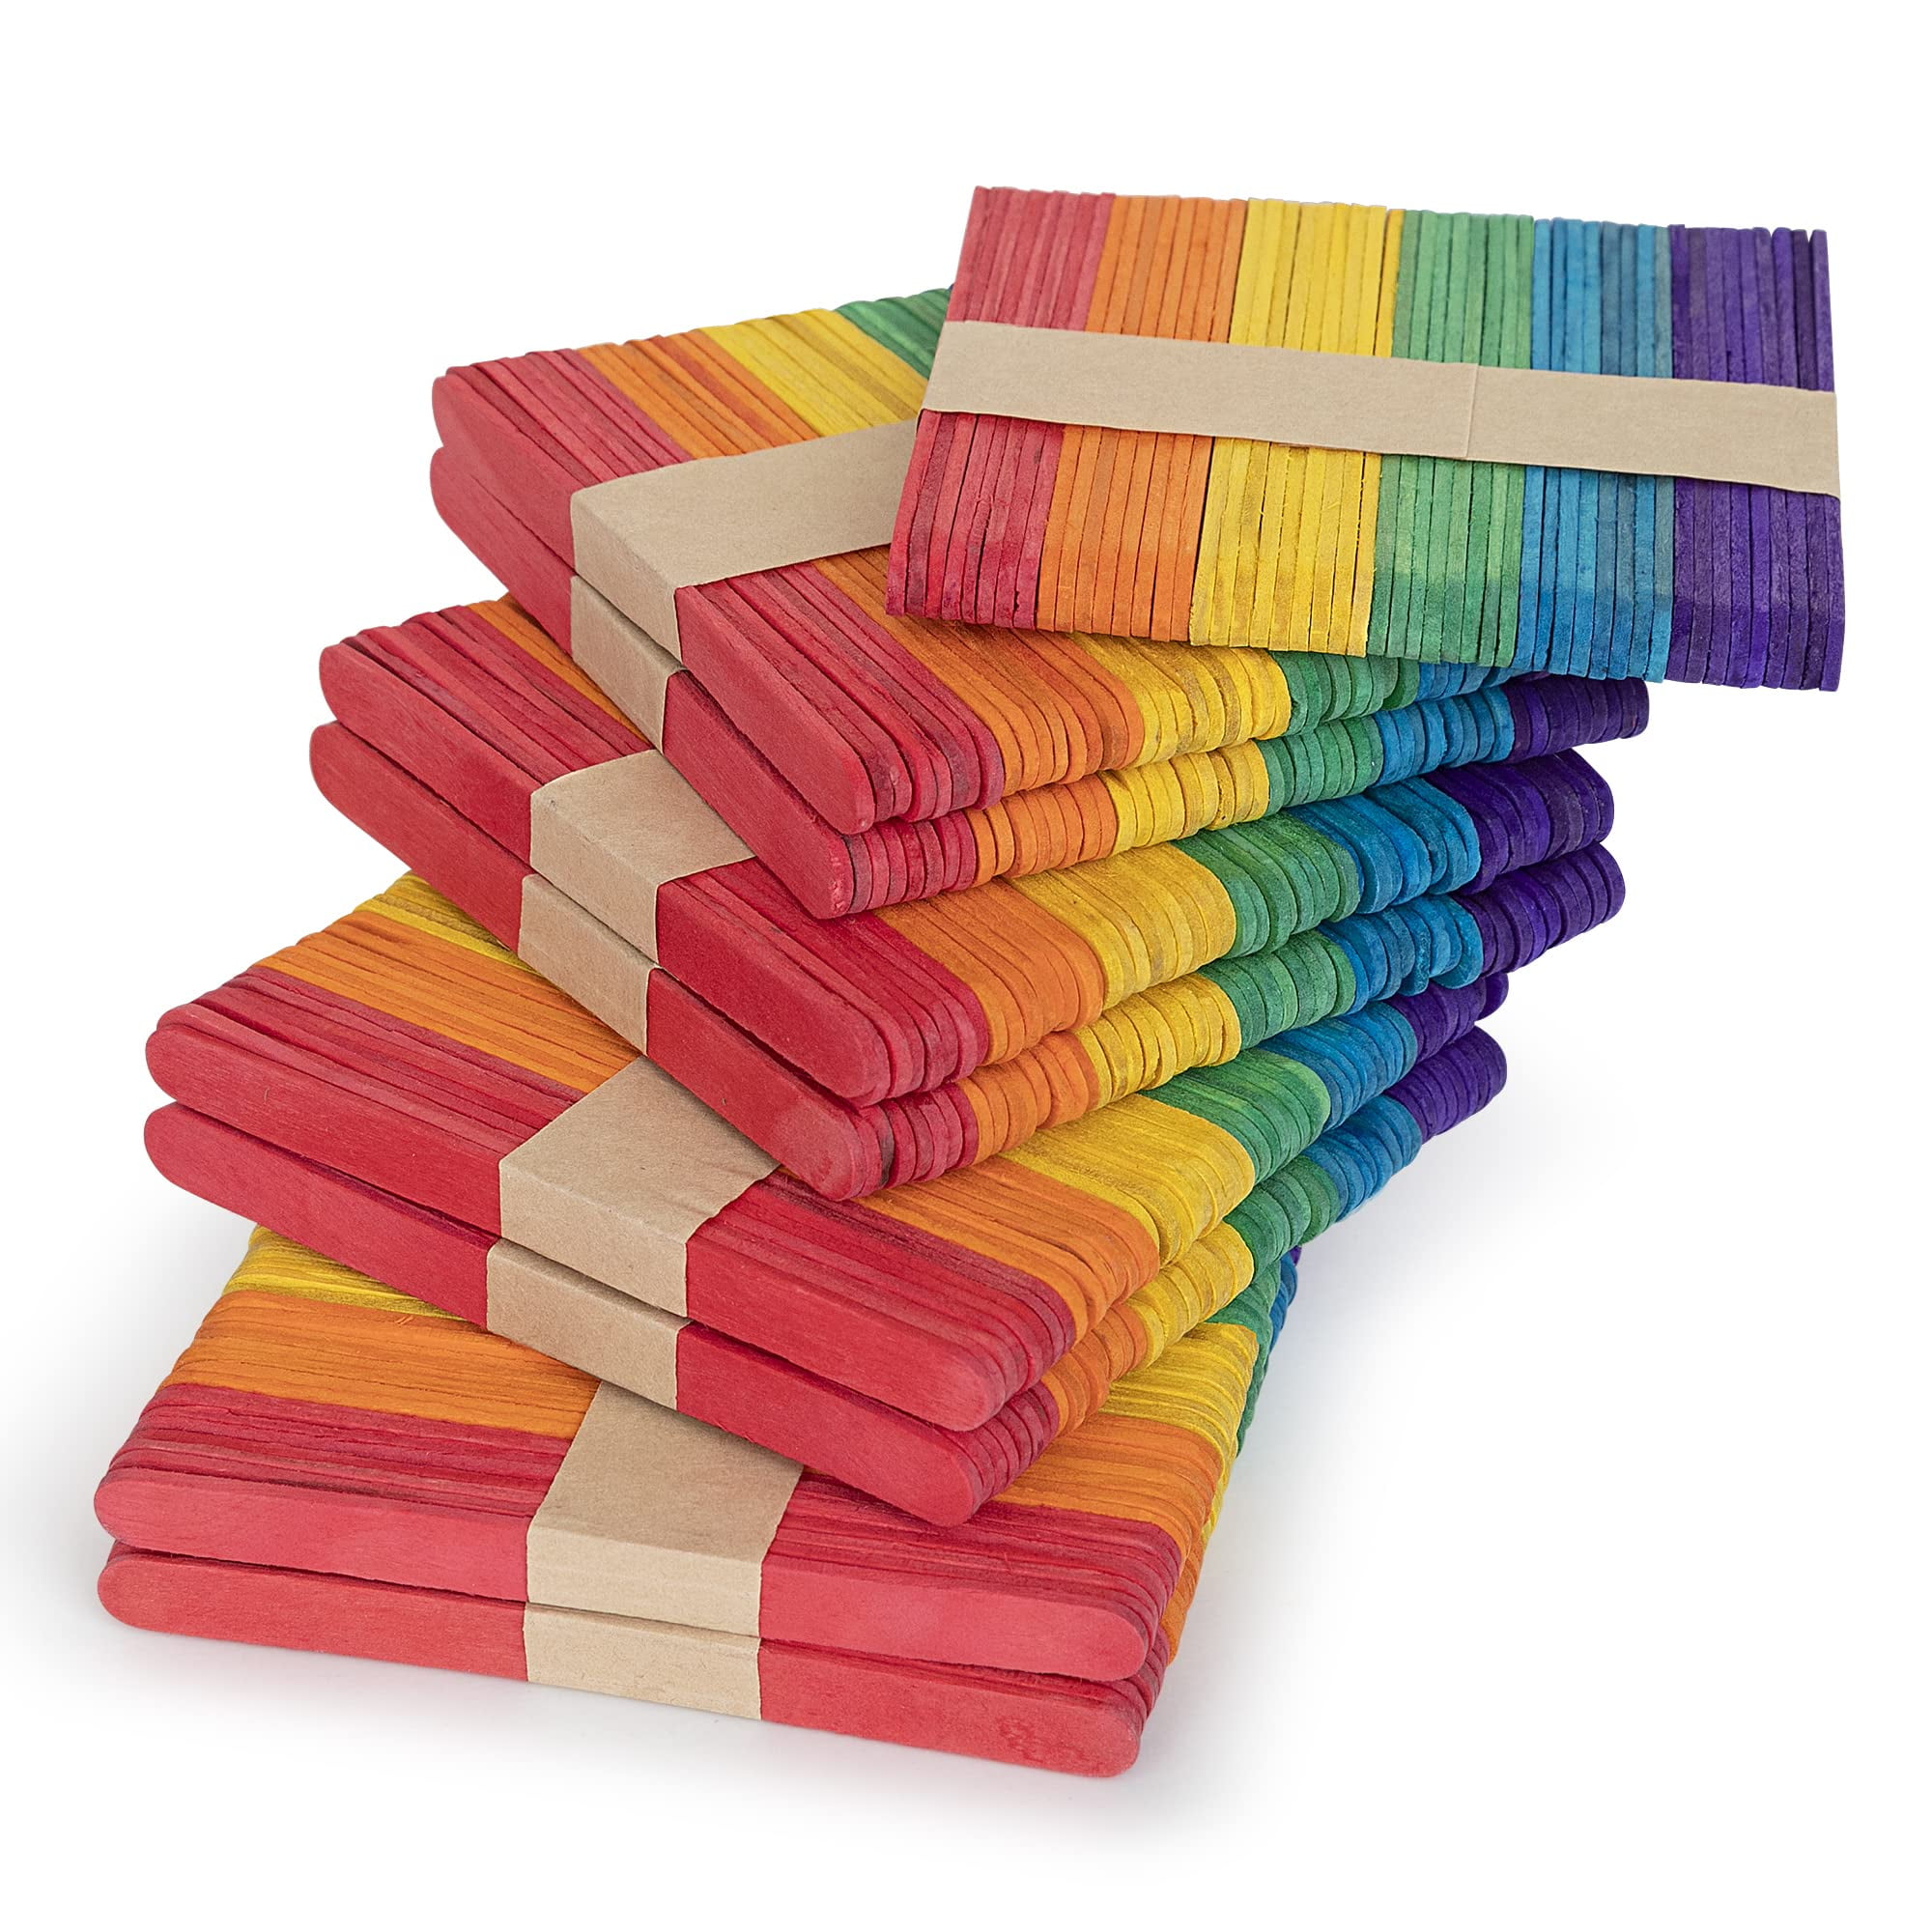 Darice 1000 Pcs Colored Popsicle Sticks for Crafts, 4.5 Colorful Wooden Rainbow Craft Sticks Supplies, Stem DIY Art, Ages 3+